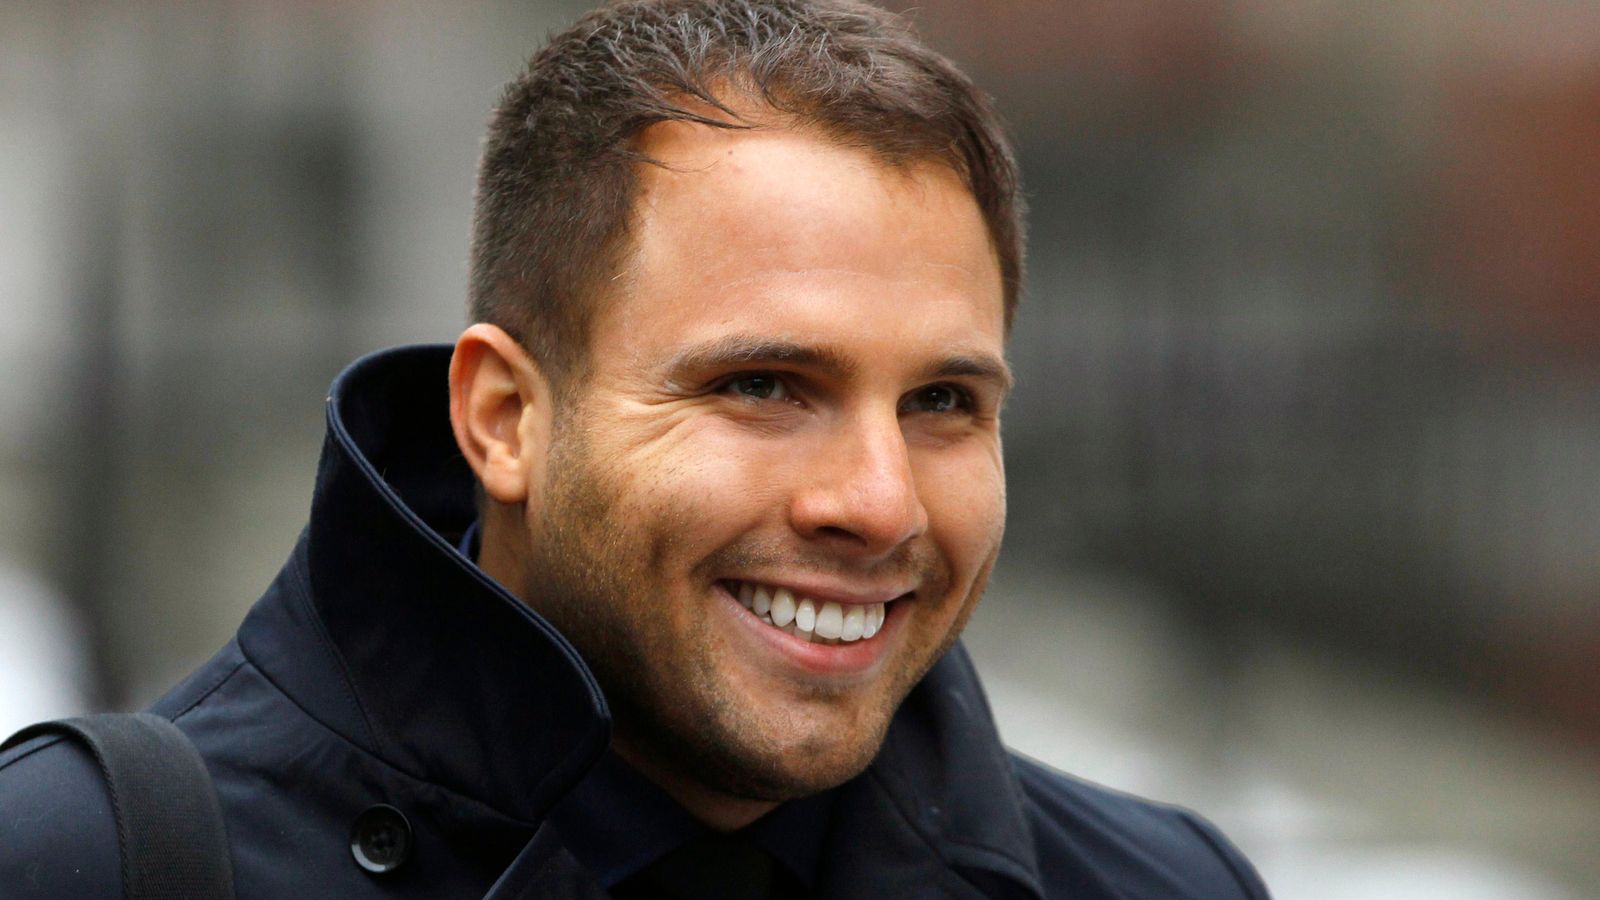 TV presenter Dan Wootton to face no further action from police